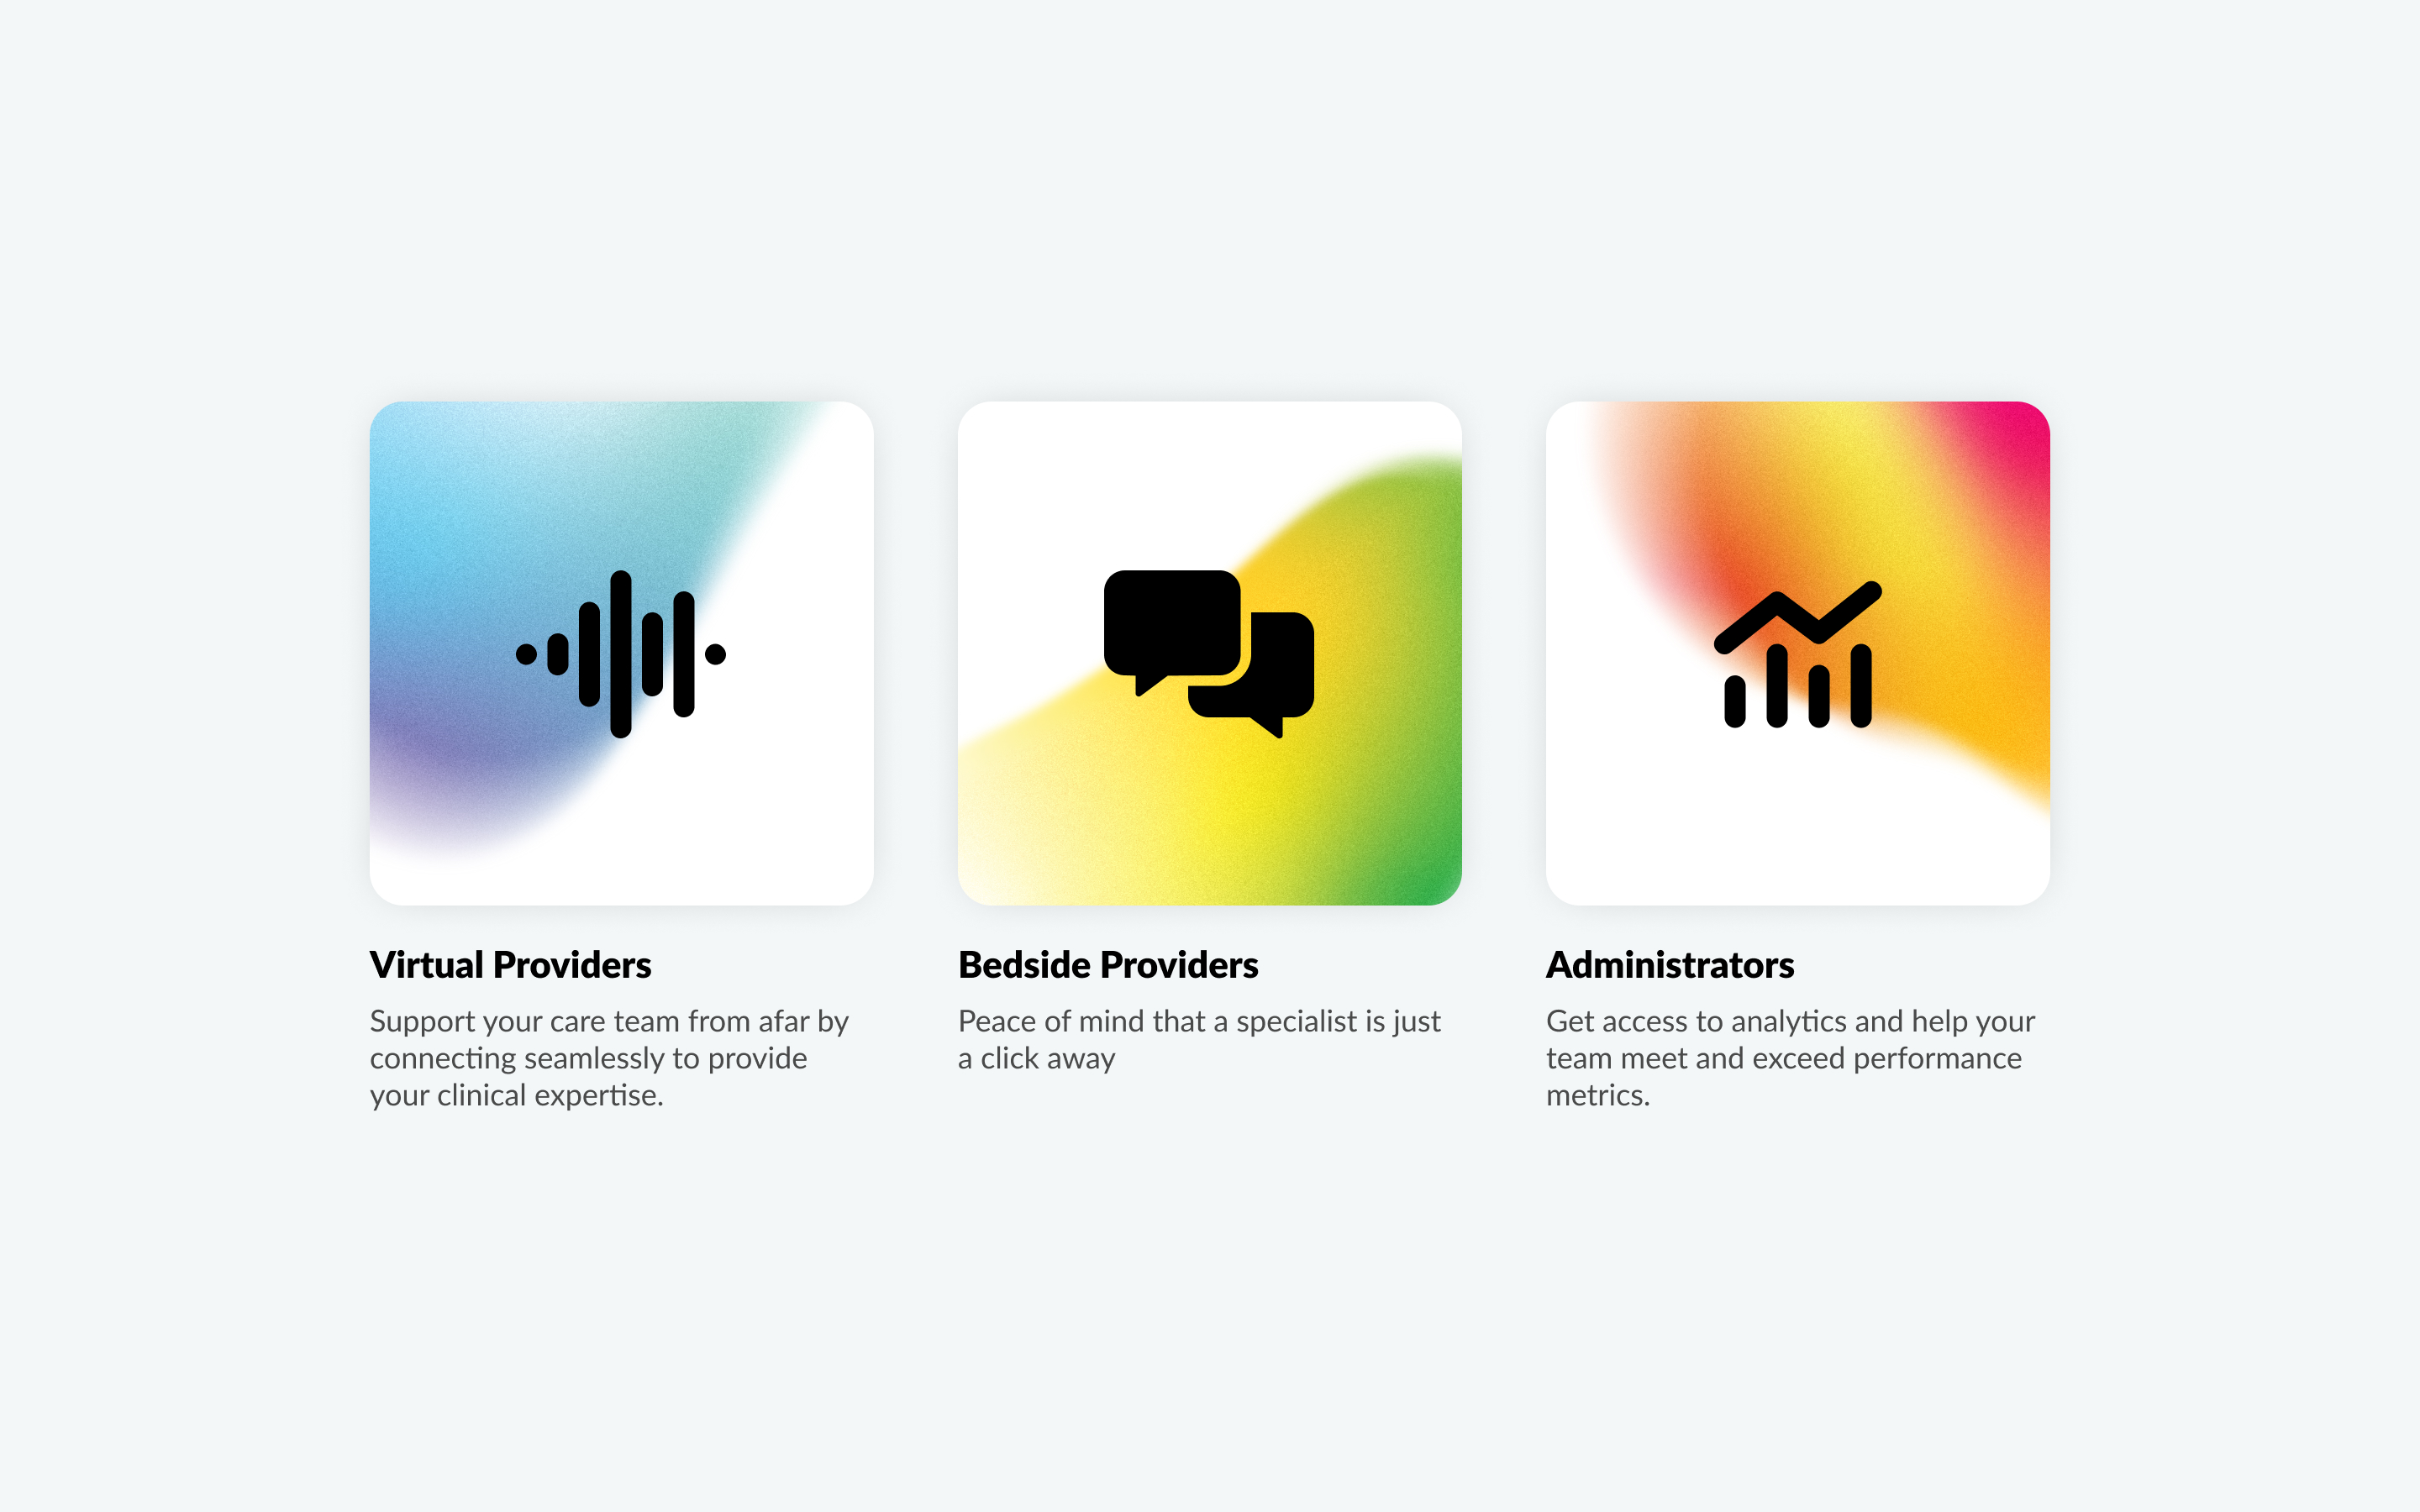 Close up image of the main user types of the application: virtual providers, bedside providers & administrators